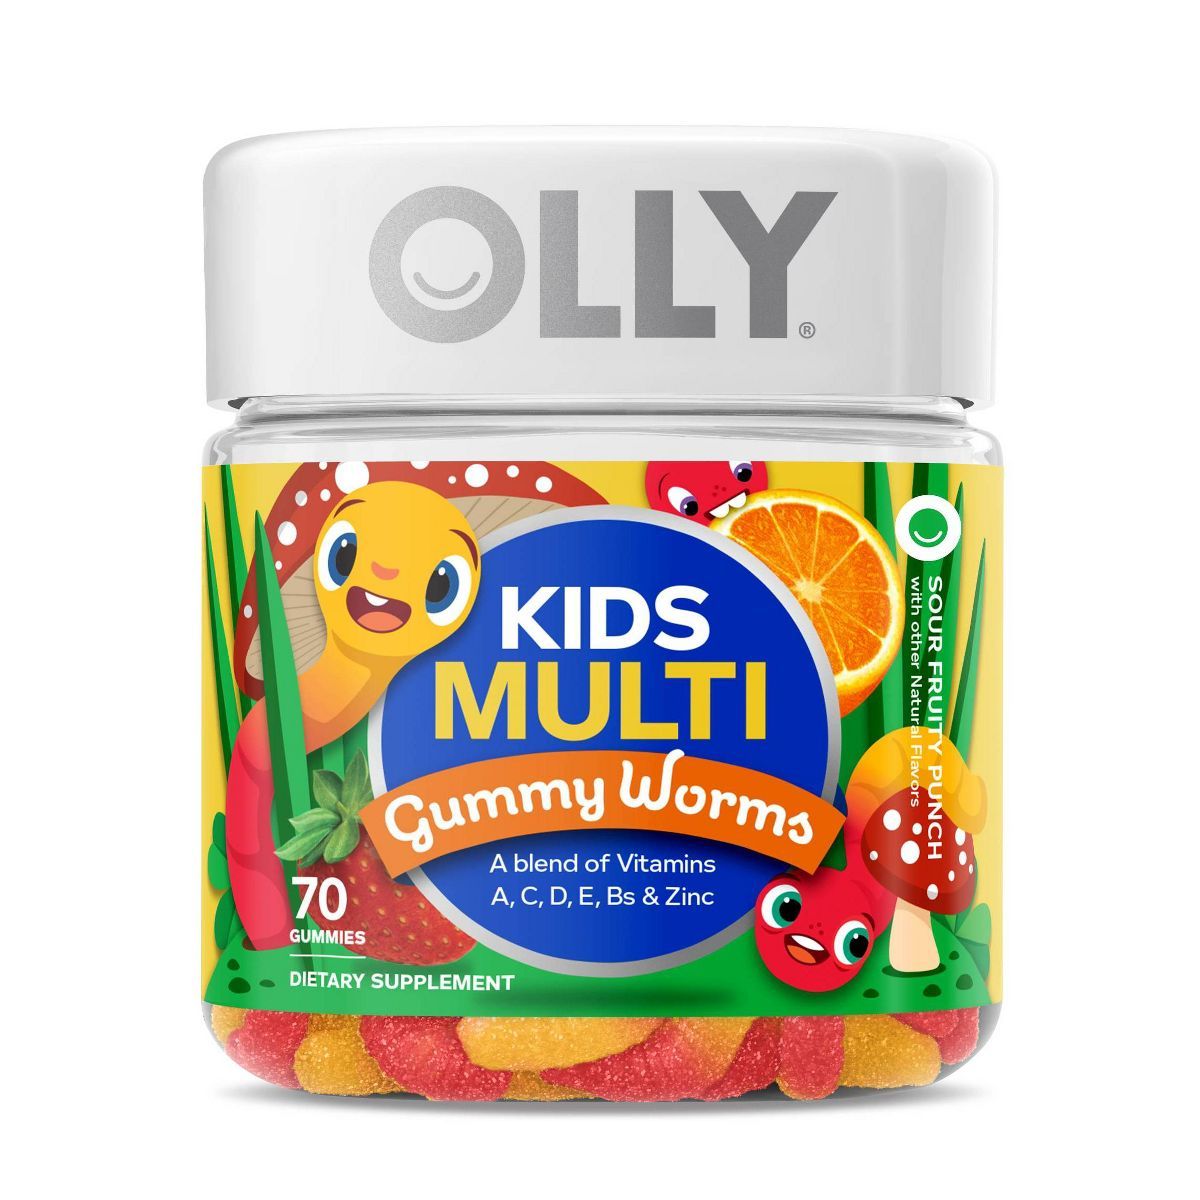 OLLY Kids Multivitamin Gummy Worms - 70ct | Target